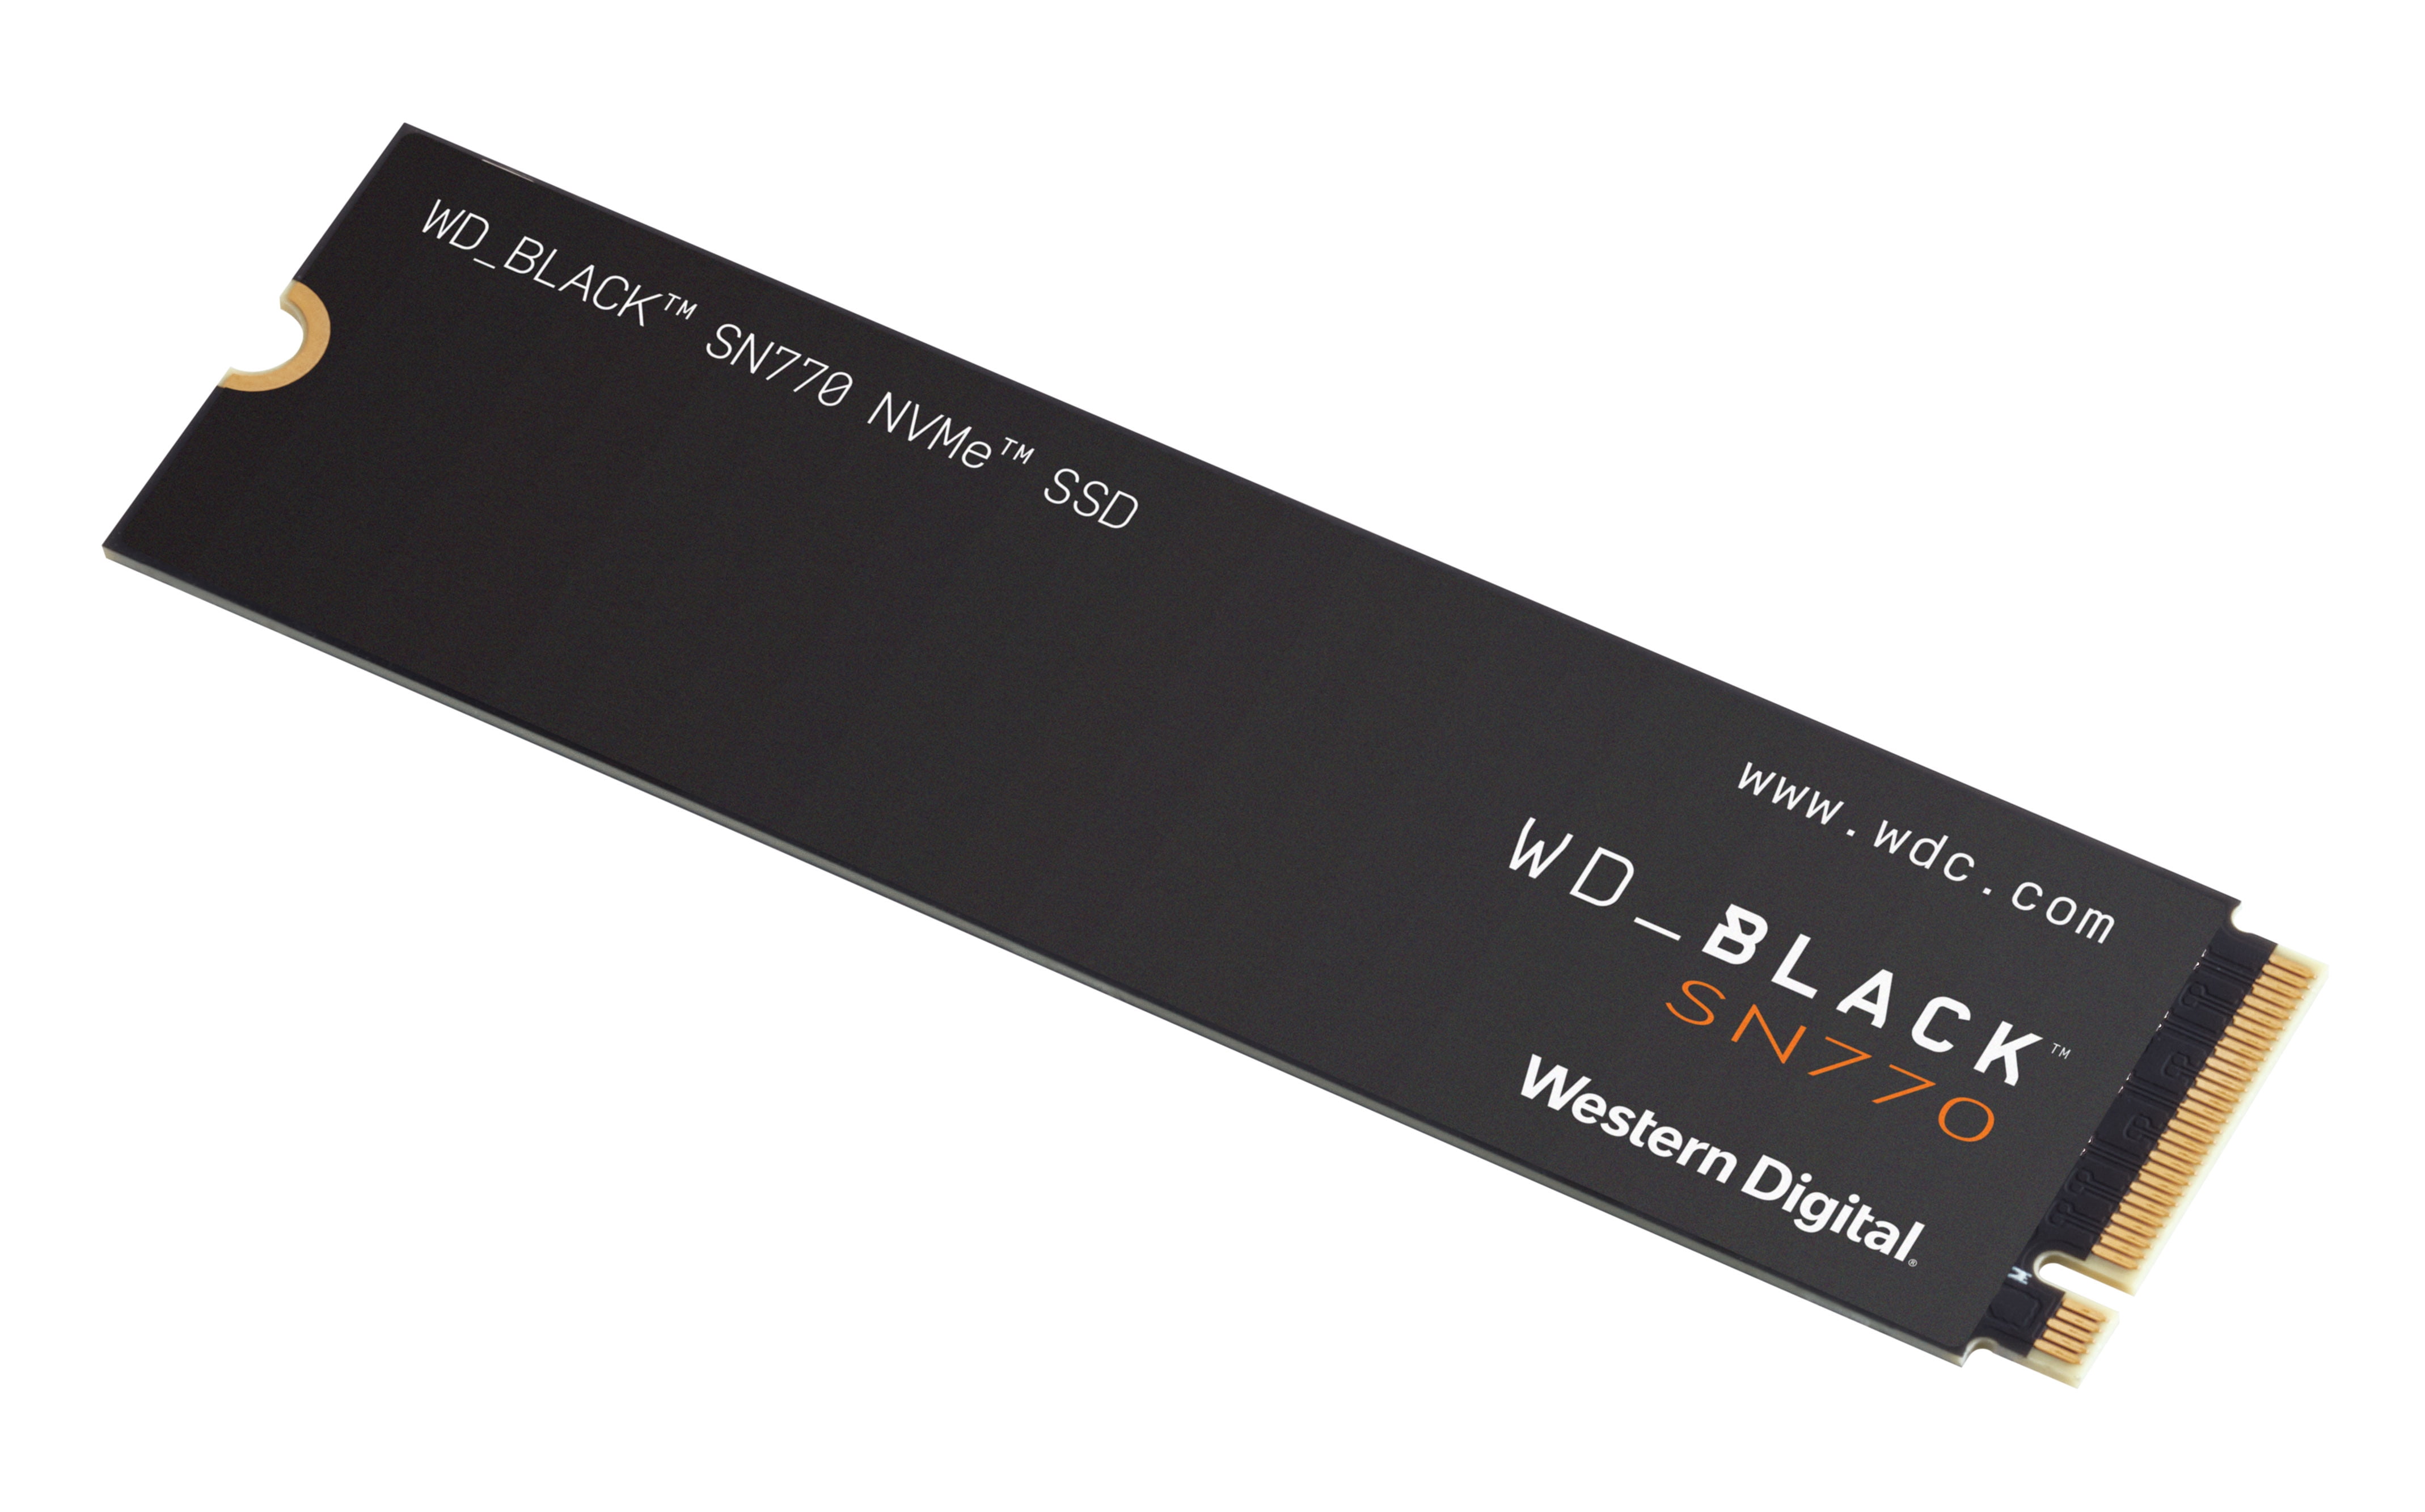 How can it be this good? WD_BLACK SN770 NVMe SSD 1TB Review 